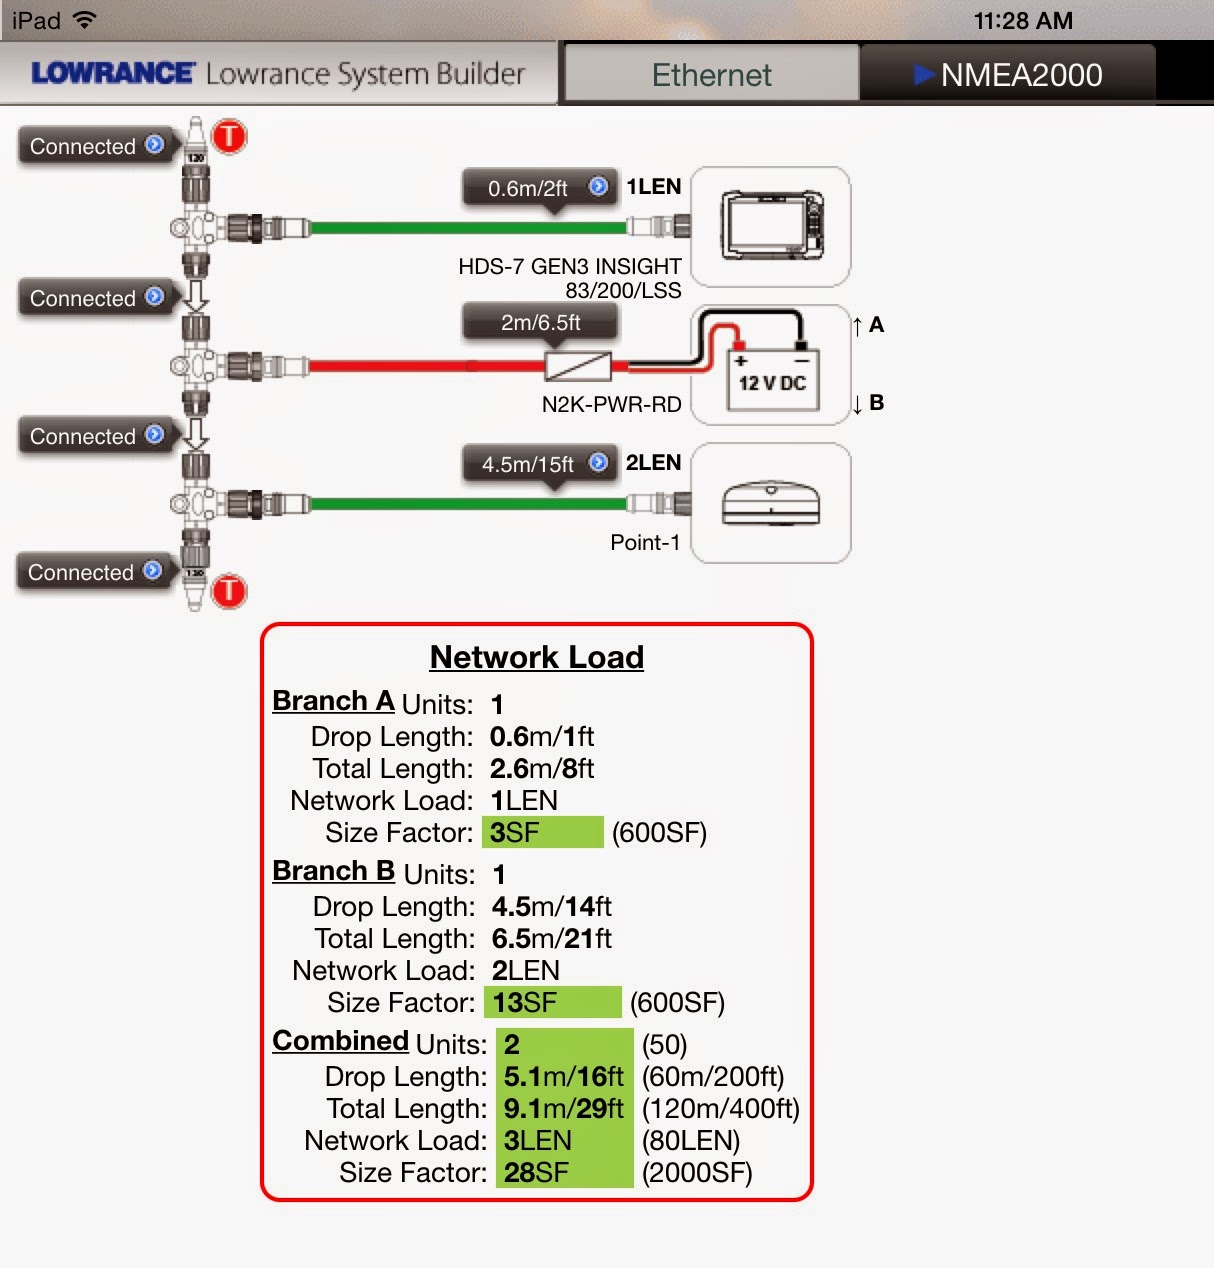 lowrance networking diagrams